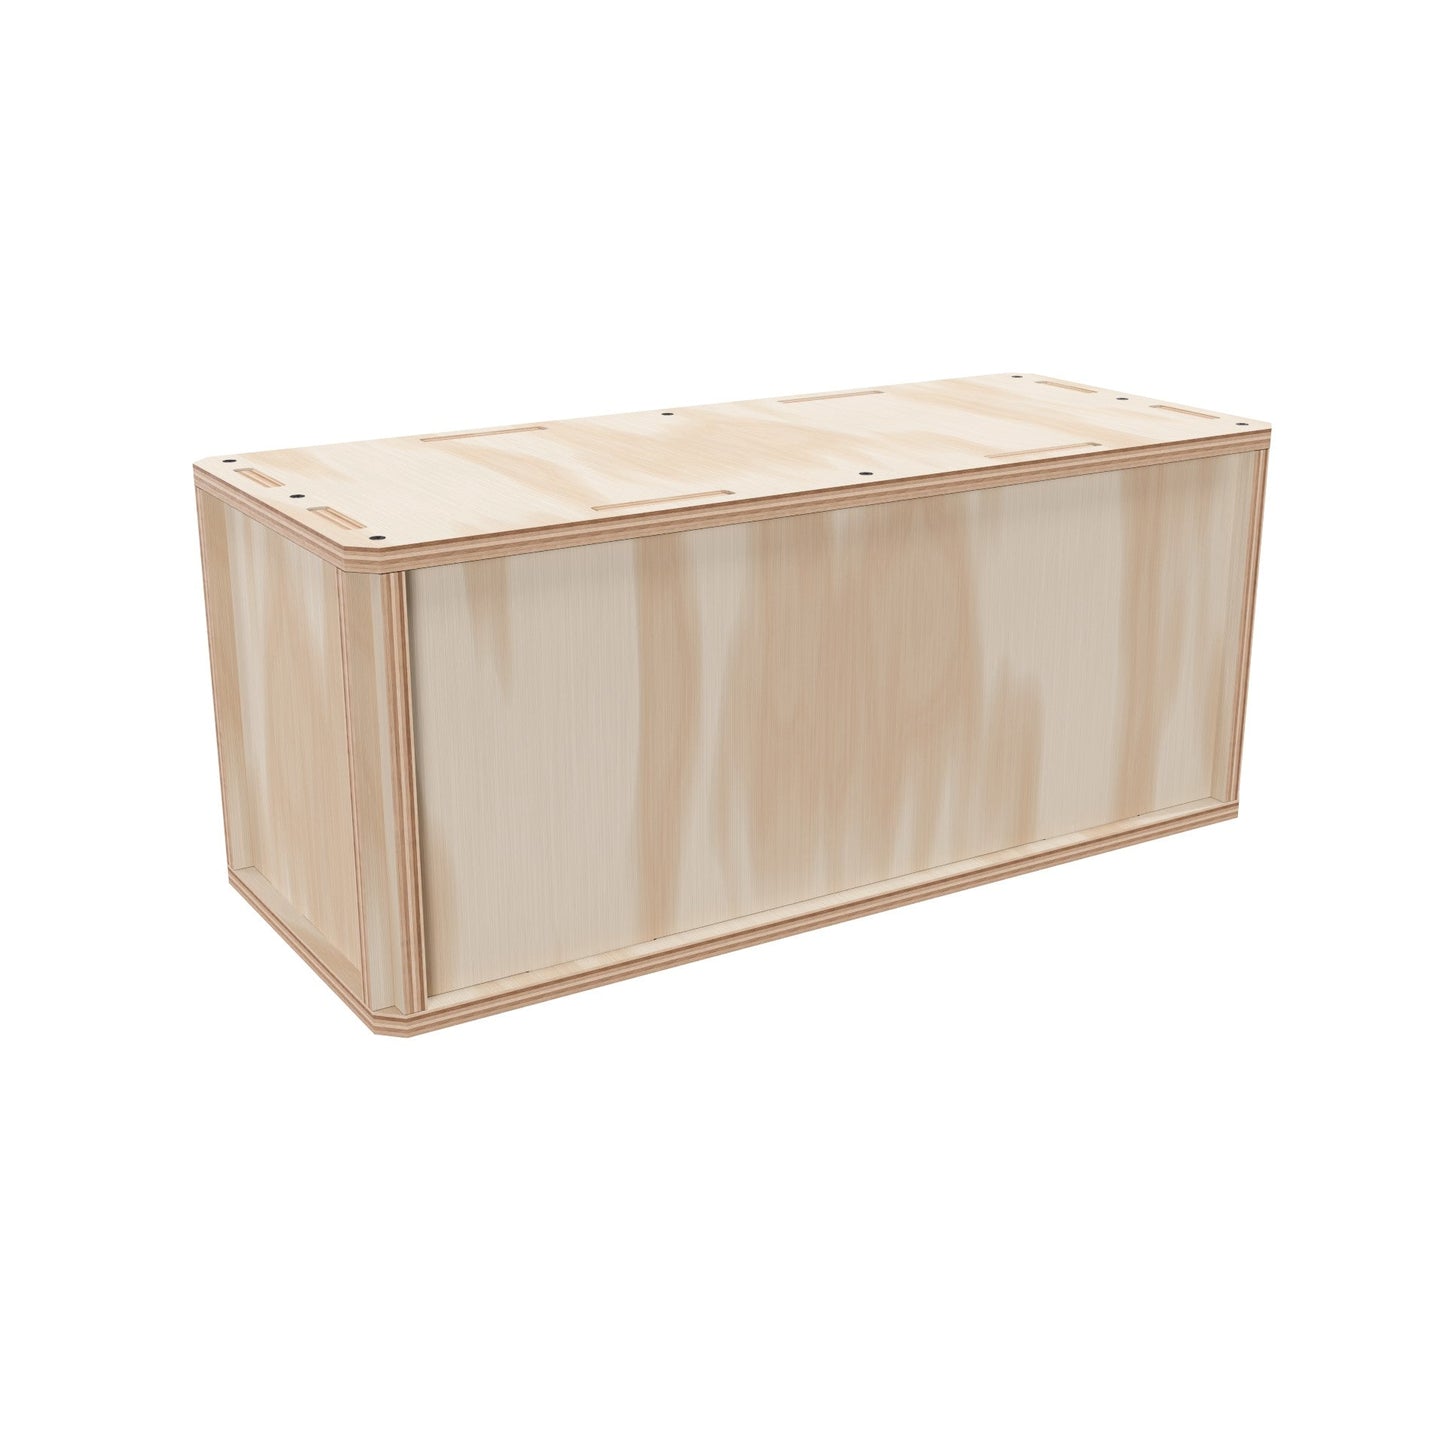 Plywood Shipping Crate 24x10x10